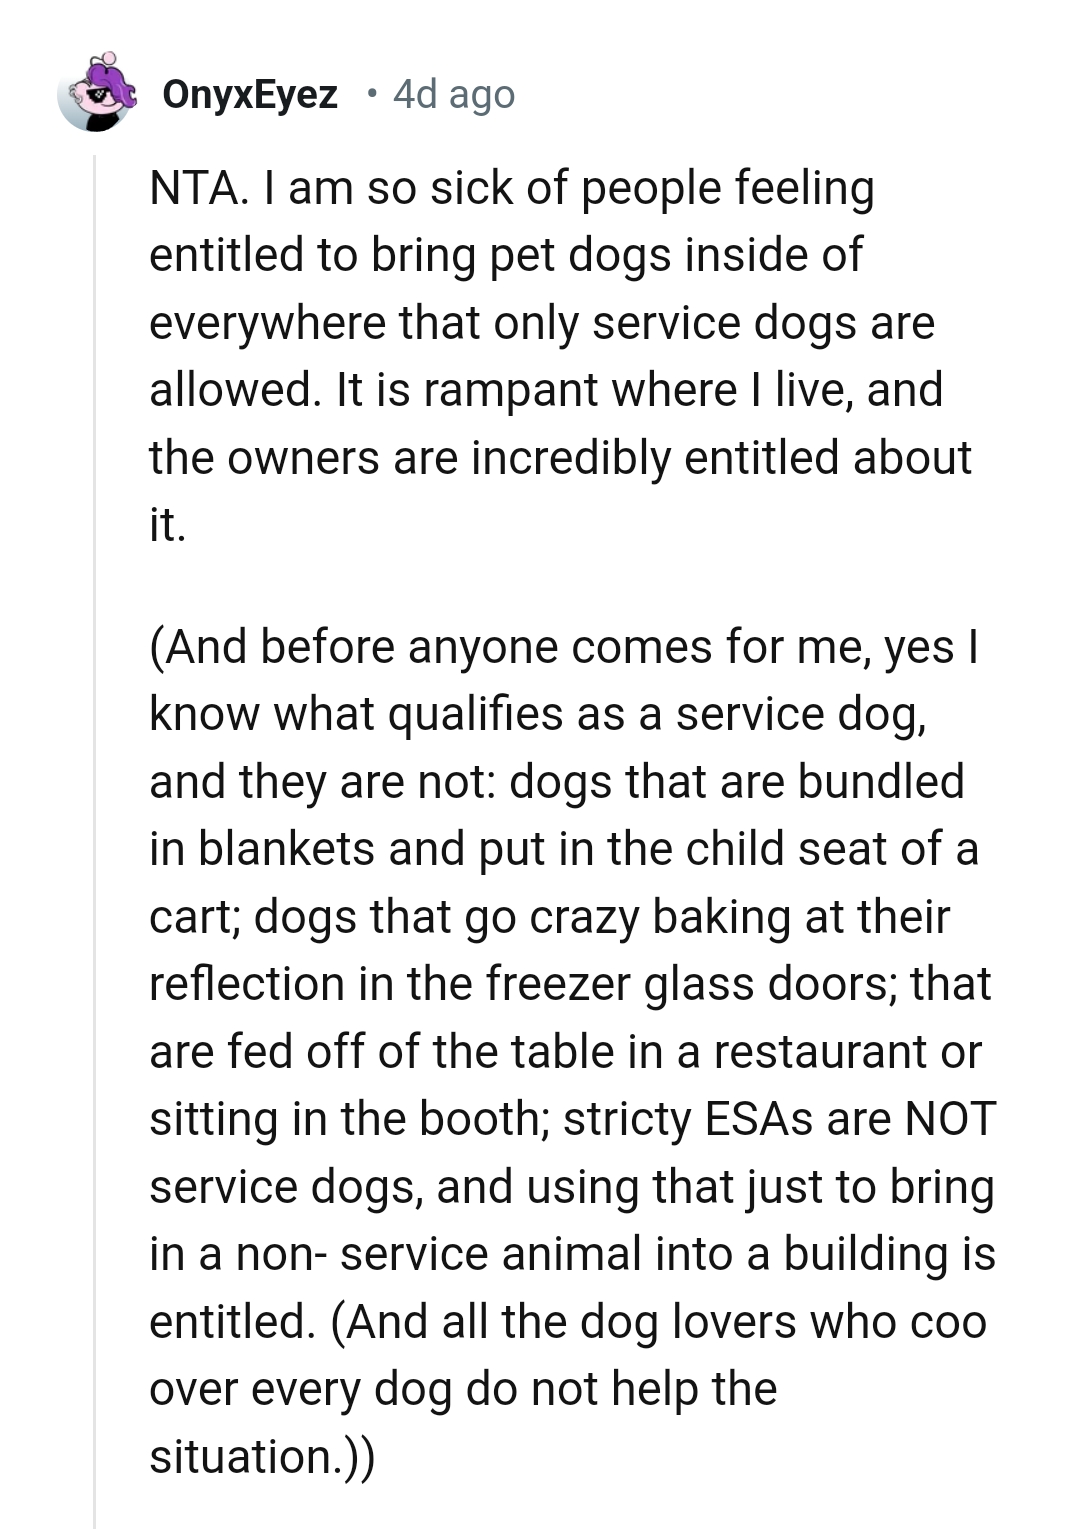 This Redditor is sick of people feeling entitled to bring dogs inside of everywhere